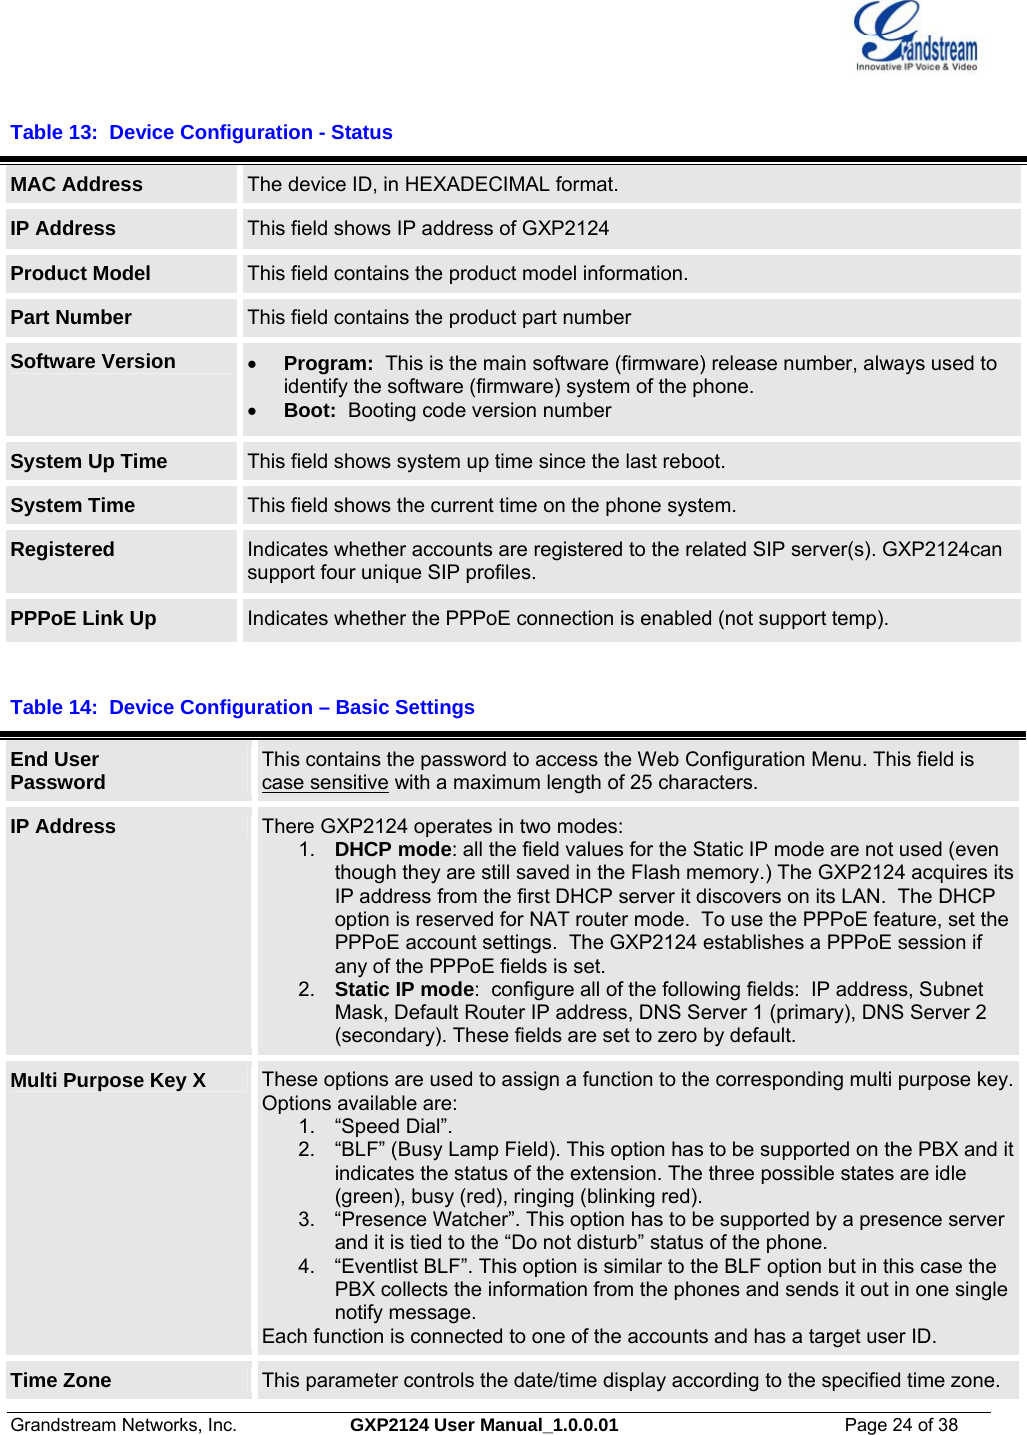  Grandstream Networks, Inc.  GXP2124 User Manual_1.0.0.01  Page 24 of 38                                                                                                                      Table 13:  Device Configuration - Status  MAC Address   The device ID, in HEXADECIMAL format. IP Address  This field shows IP address of GXP2124 Product Model  This field contains the product model information. Part Number  This field contains the product part number Software Version  • Program:  This is the main software (firmware) release number, always used to identify the software (firmware) system of the phone. • Boot:  Booting code version number System Up Time  This field shows system up time since the last reboot. System Time  This field shows the current time on the phone system. Registered  Indicates whether accounts are registered to the related SIP server(s). GXP2124can support four unique SIP profiles. PPPoE Link Up  Indicates whether the PPPoE connection is enabled (not support temp).  Table 14:  Device Configuration – Basic Settings  End User Password  This contains the password to access the Web Configuration Menu. This field is case sensitive with a maximum length of 25 characters. IP Address  There GXP2124 operates in two modes: 1.  DHCP mode: all the field values for the Static IP mode are not used (even though they are still saved in the Flash memory.) The GXP2124 acquires its IP address from the first DHCP server it discovers on its LAN.  The DHCP option is reserved for NAT router mode.  To use the PPPoE feature, set the PPPoE account settings.  The GXP2124 establishes a PPPoE session if any of the PPPoE fields is set. 2.  Static IP mode:  configure all of the following fields:  IP address, Subnet Mask, Default Router IP address, DNS Server 1 (primary), DNS Server 2 (secondary). These fields are set to zero by default. Multi Purpose Key X  These options are used to assign a function to the corresponding multi purpose key.Options available are:  1. “Speed Dial”. 2.  “BLF” (Busy Lamp Field). This option has to be supported on the PBX and it indicates the status of the extension. The three possible states are idle (green), busy (red), ringing (blinking red). 3.  “Presence Watcher”. This option has to be supported by a presence server and it is tied to the “Do not disturb” status of the phone. 4.  “Eventlist BLF”. This option is similar to the BLF option but in this case the PBX collects the information from the phones and sends it out in one single notify message. Each function is connected to one of the accounts and has a target user ID.  Time Zone  This parameter controls the date/time display according to the specified time zone. 